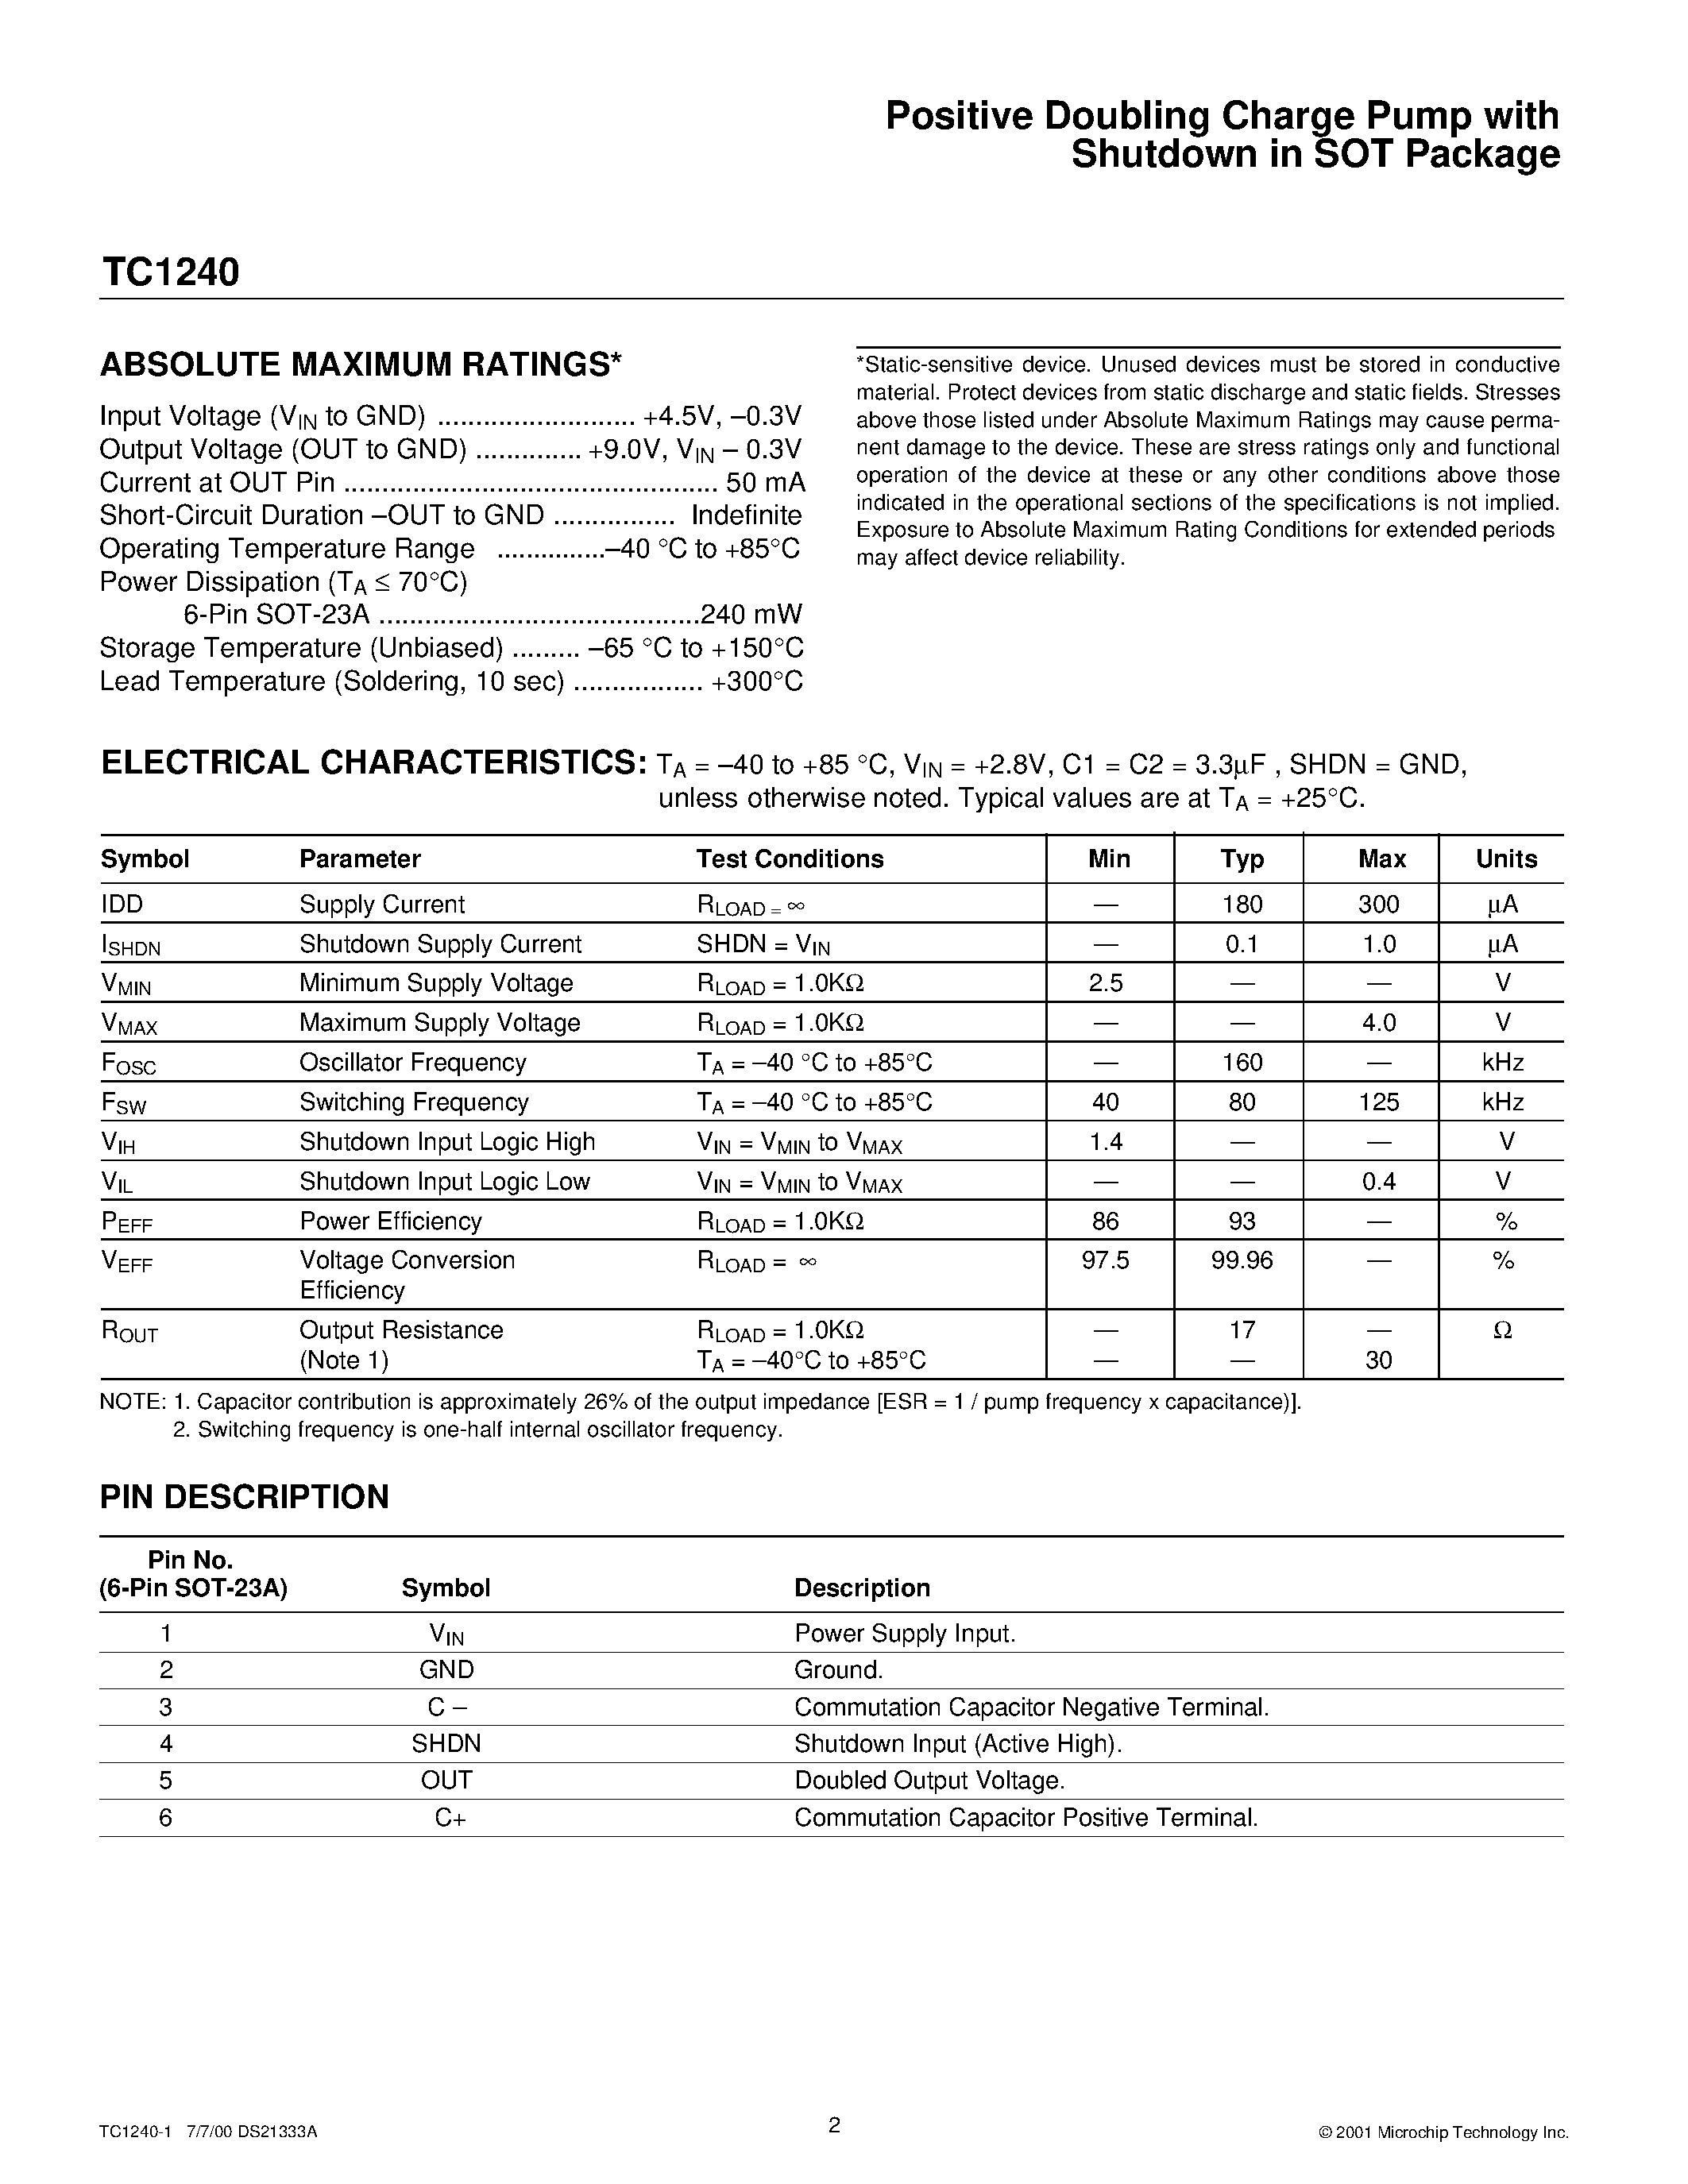 Datasheet TC1240 - Positive Doubling Charge Pump with Shutdown in SOT Package page 2